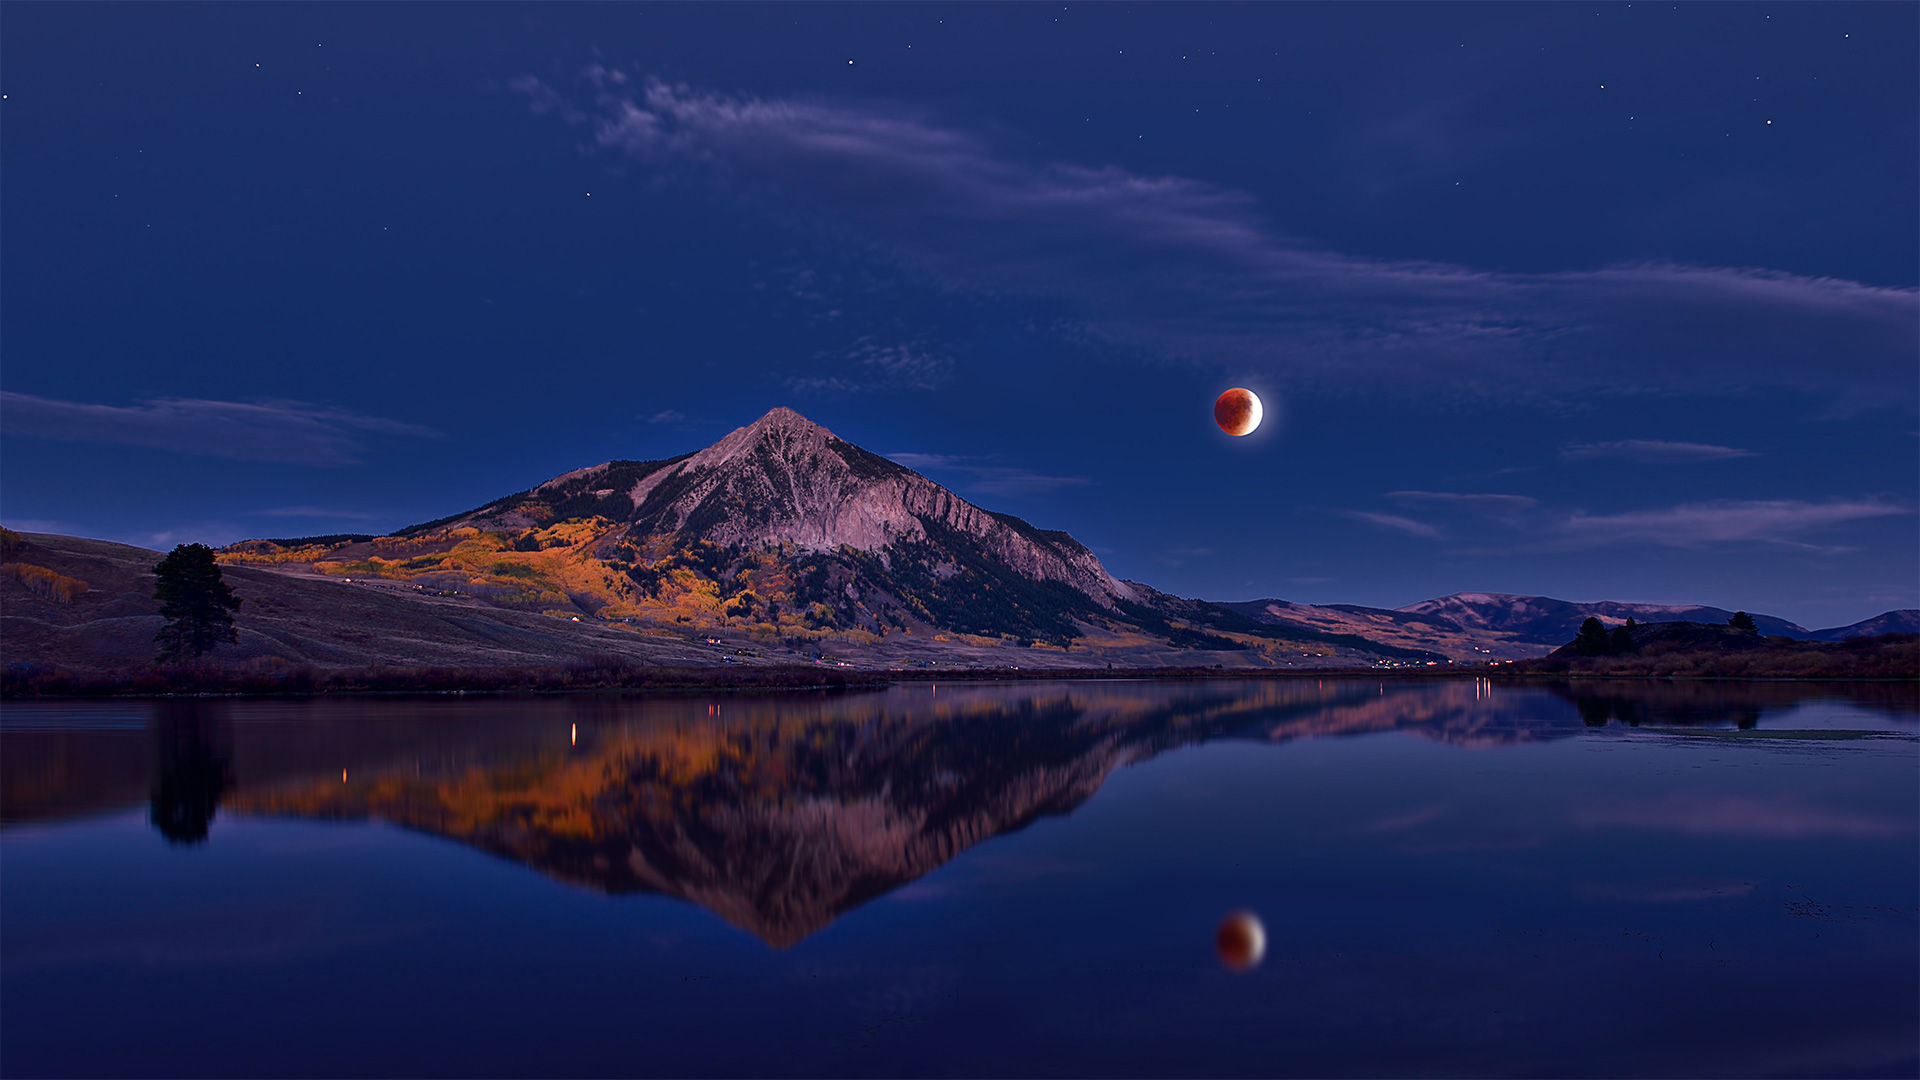 Lunar eclipse above Mount Crested Butte, Colorado - Mengzhonghua Photography/Getty Images)